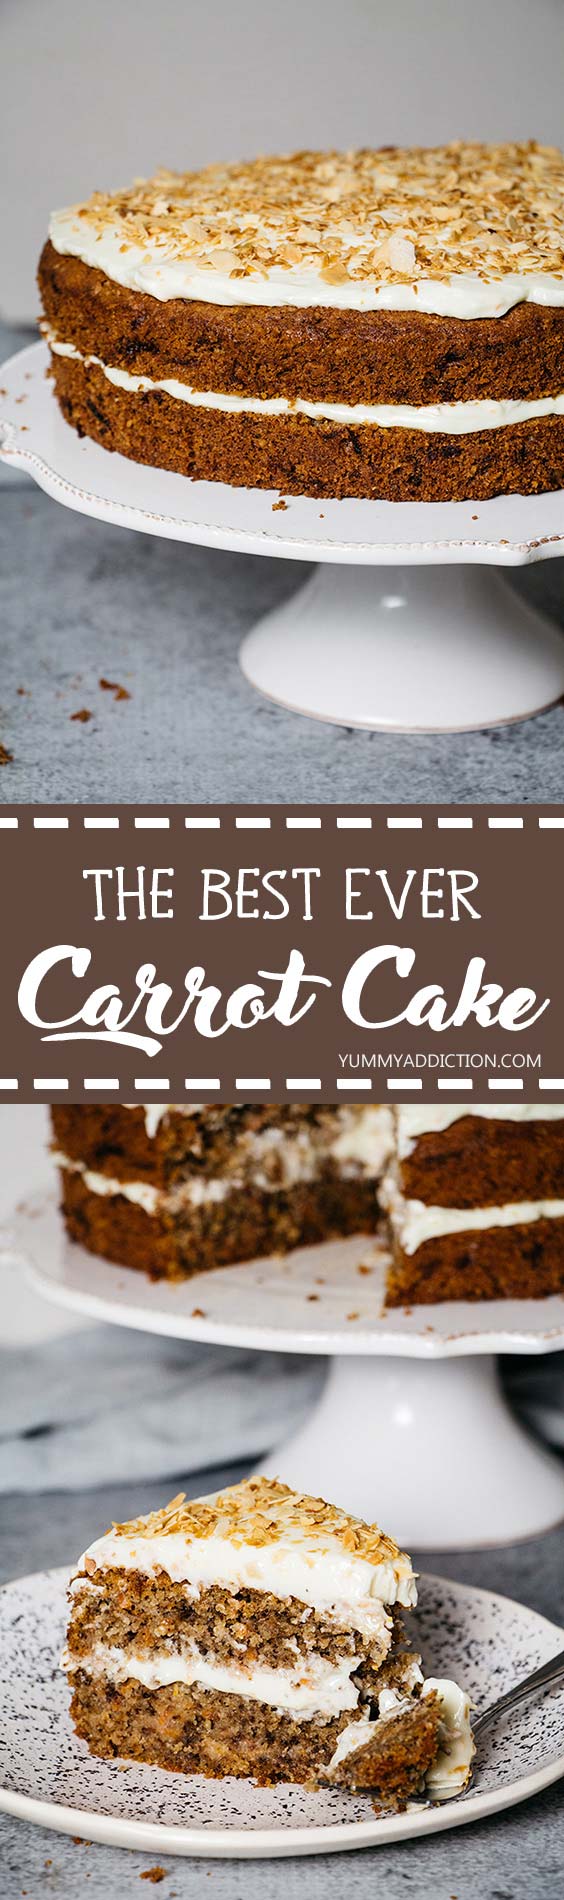 The best carrot cake recipe right here. Featuring fantastic cream cheese and mascarpone frosting, this cake is great for any occasion! | yummyaddiction.com